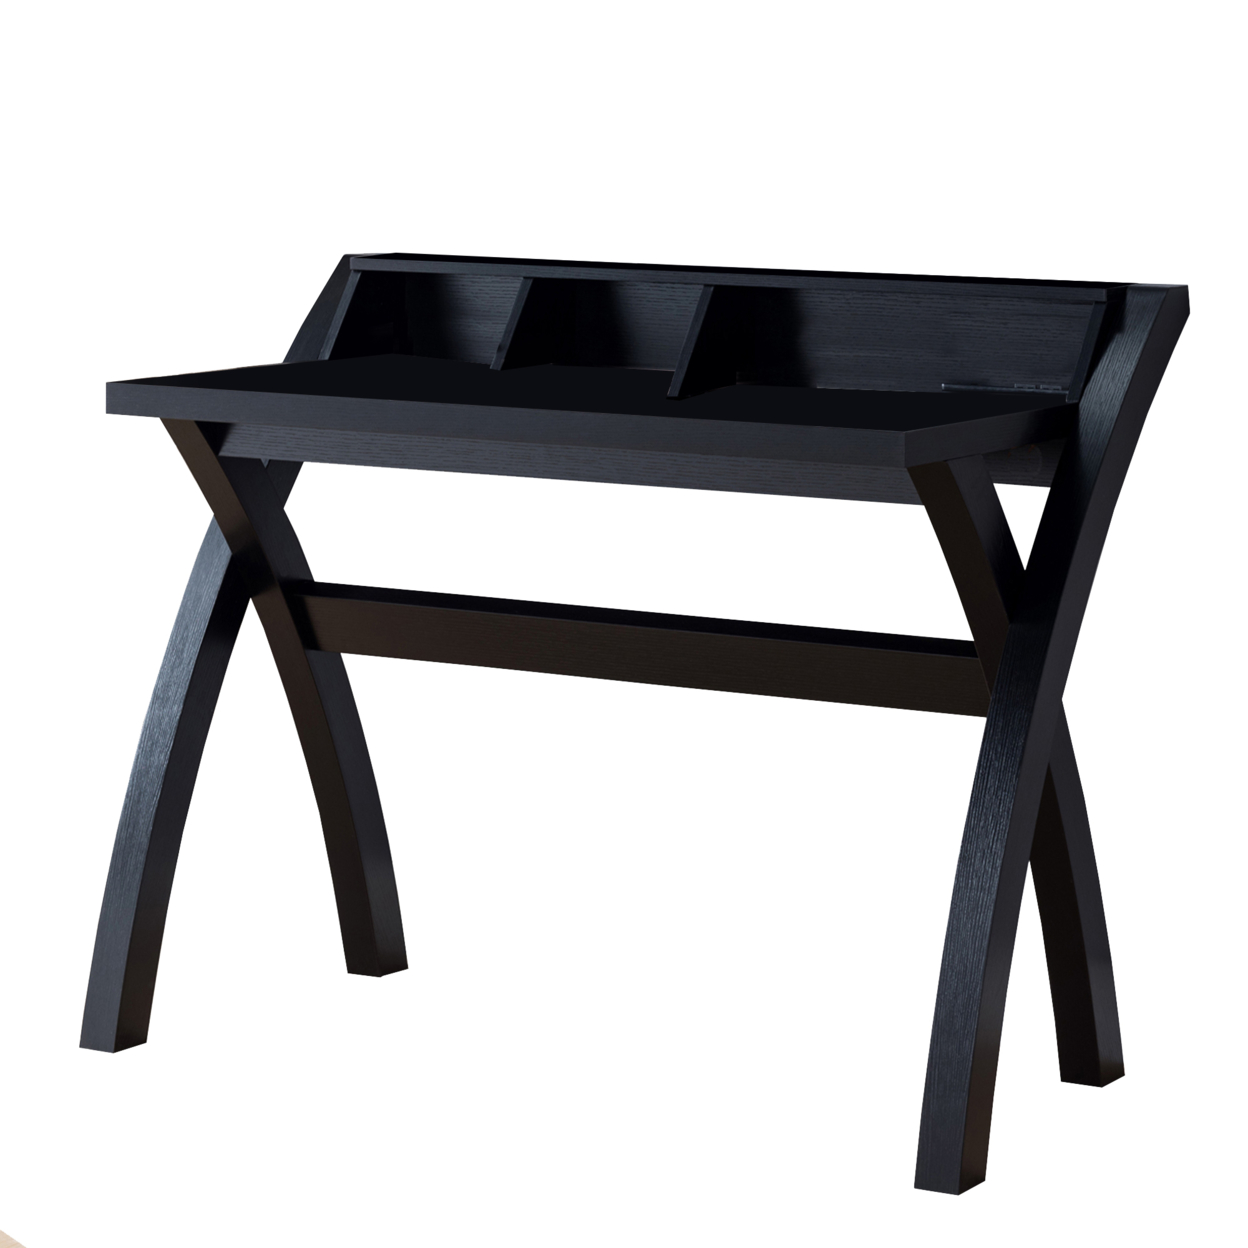 Multifunctional Wooden Desk With Electric Outlet And Trestle Base, Black- Saltoro Sherpi